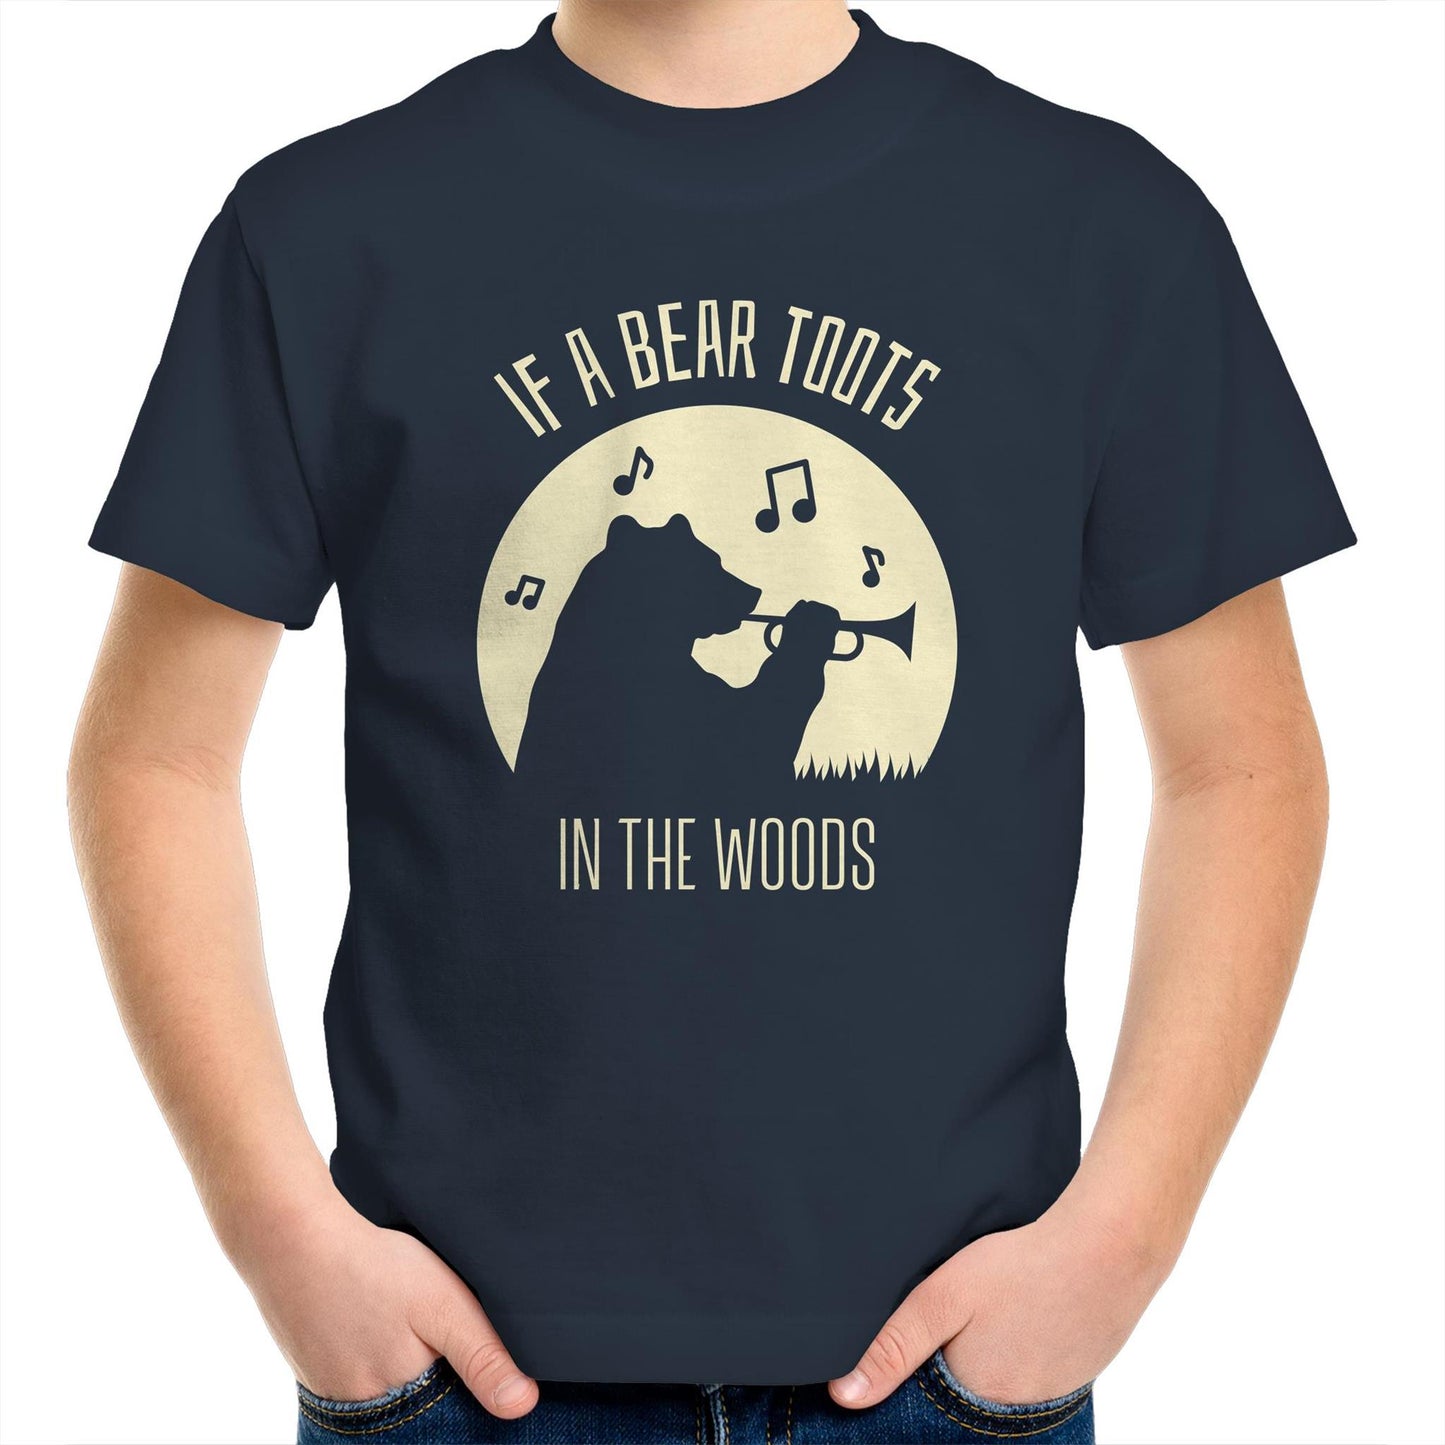 If A Bear Toots In The Woods, Trumpet Player - Kids Youth T-Shirt Navy Kids Youth T-shirt animal Music